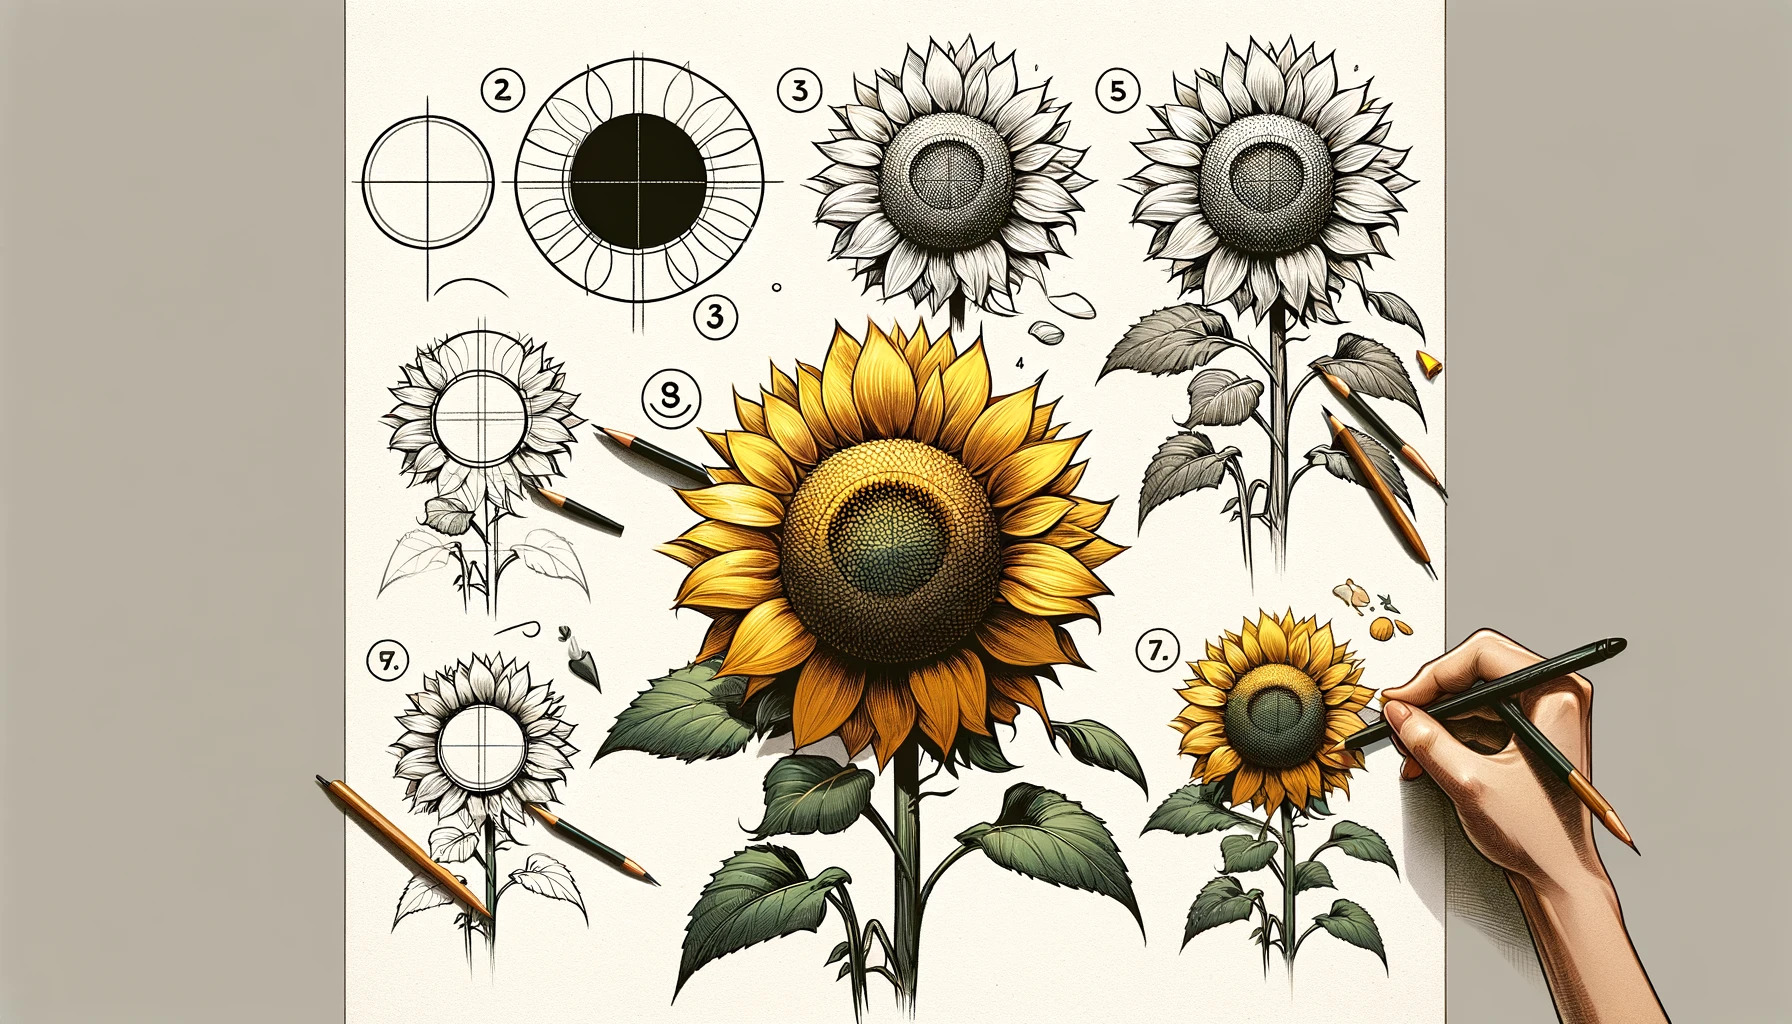 How to draw a sunflower: A step-by-step guide